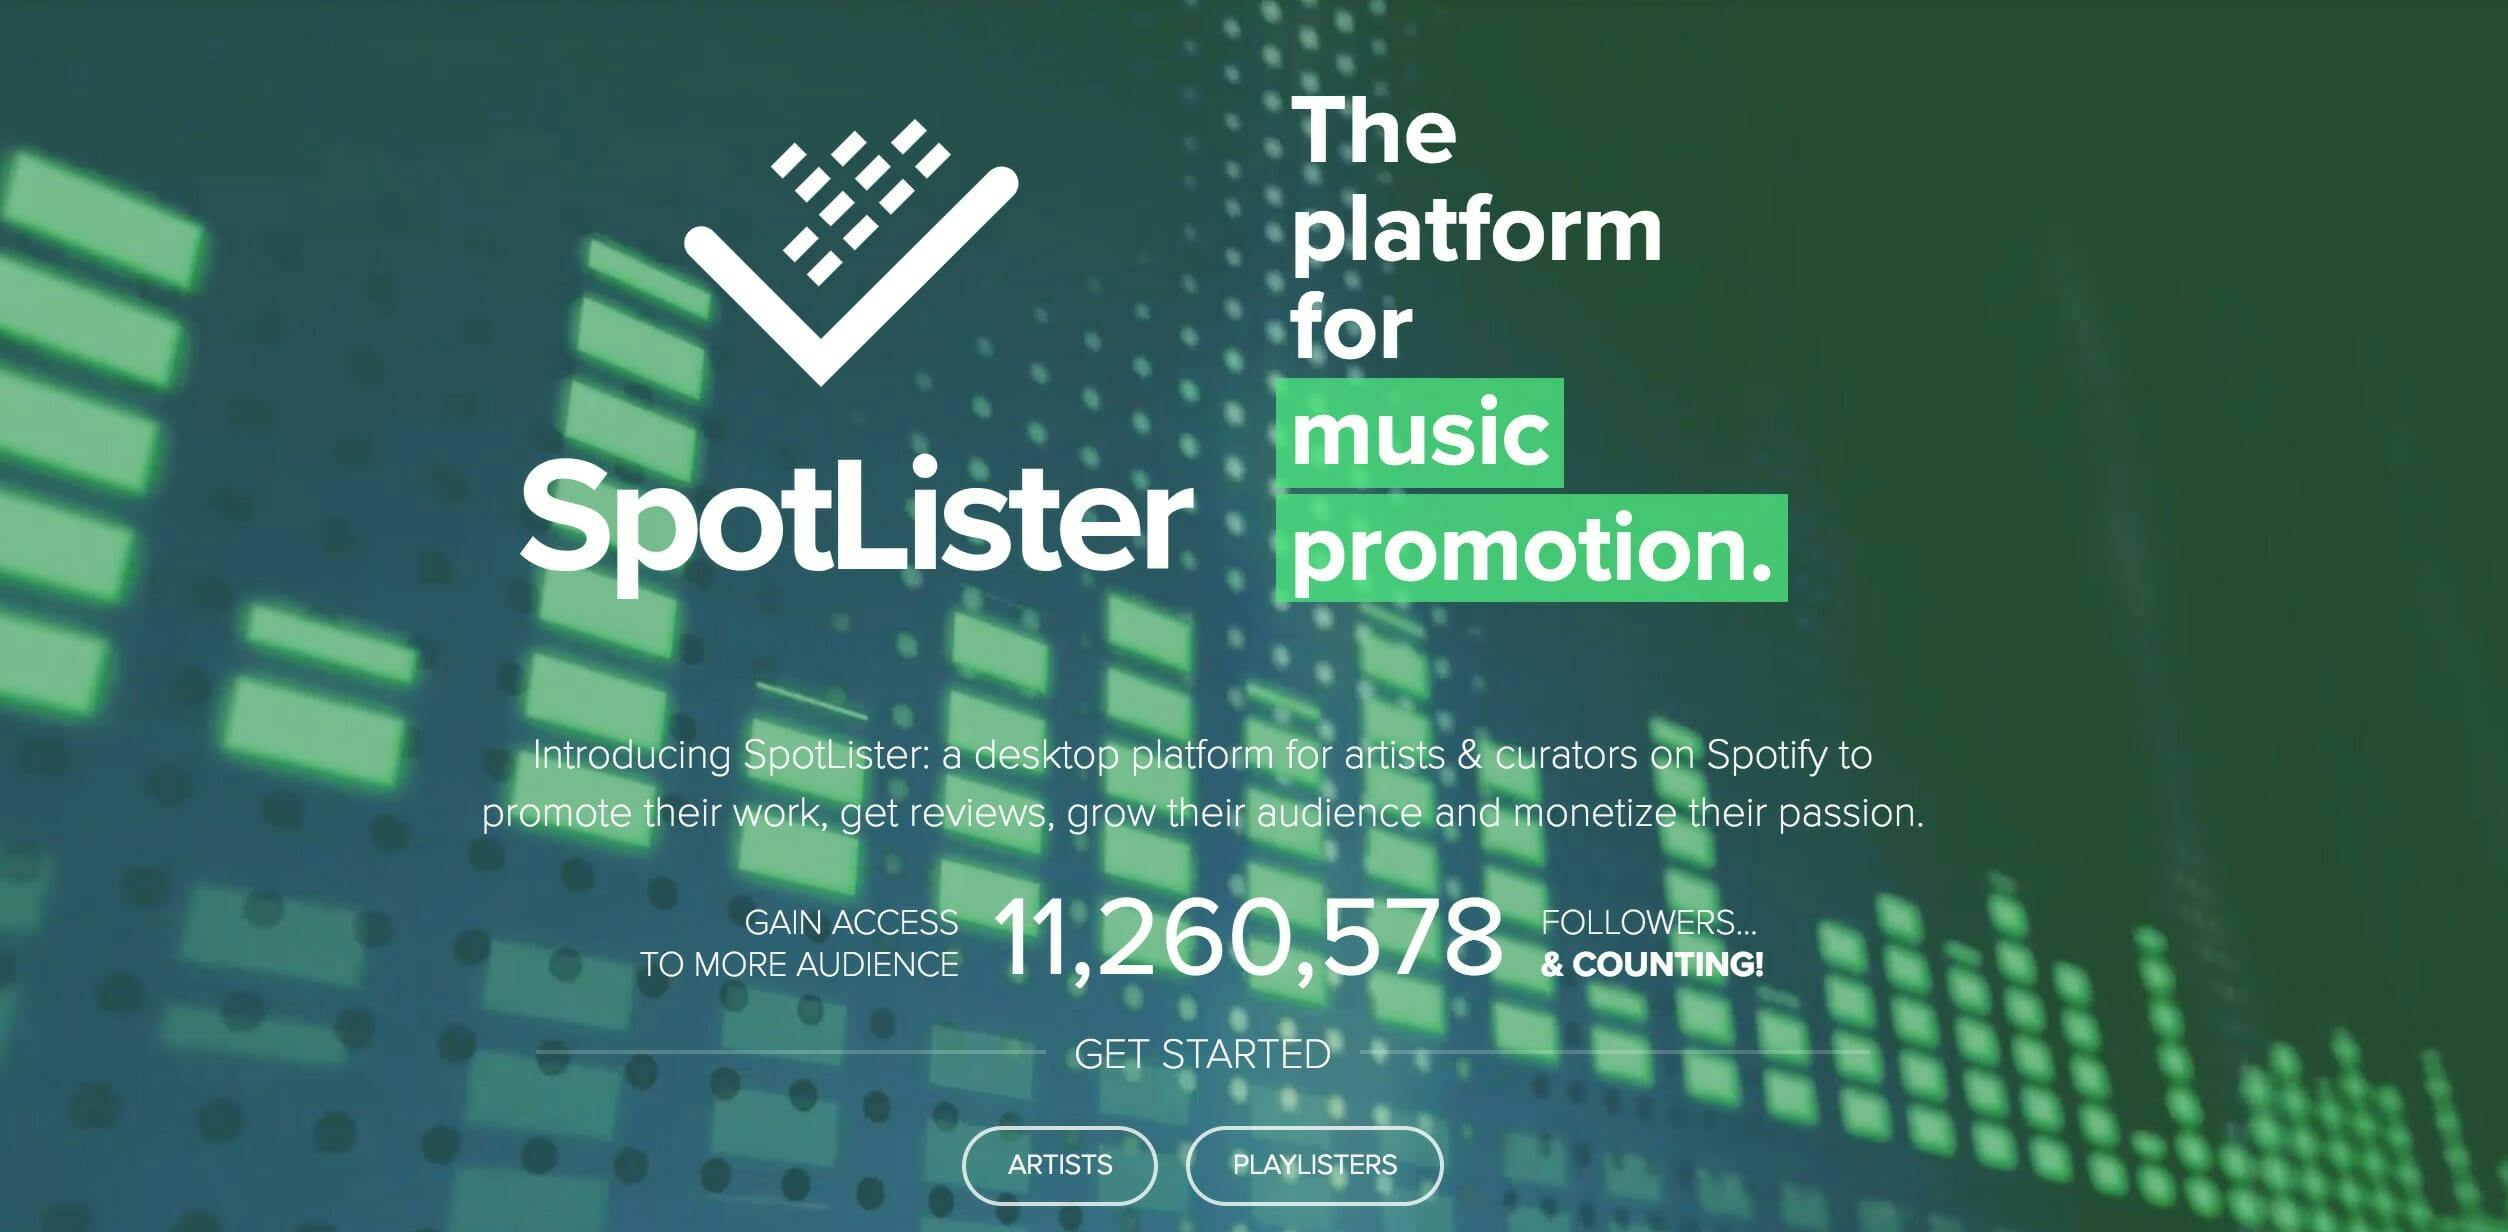 how to buy Spotify followers - SpotLister